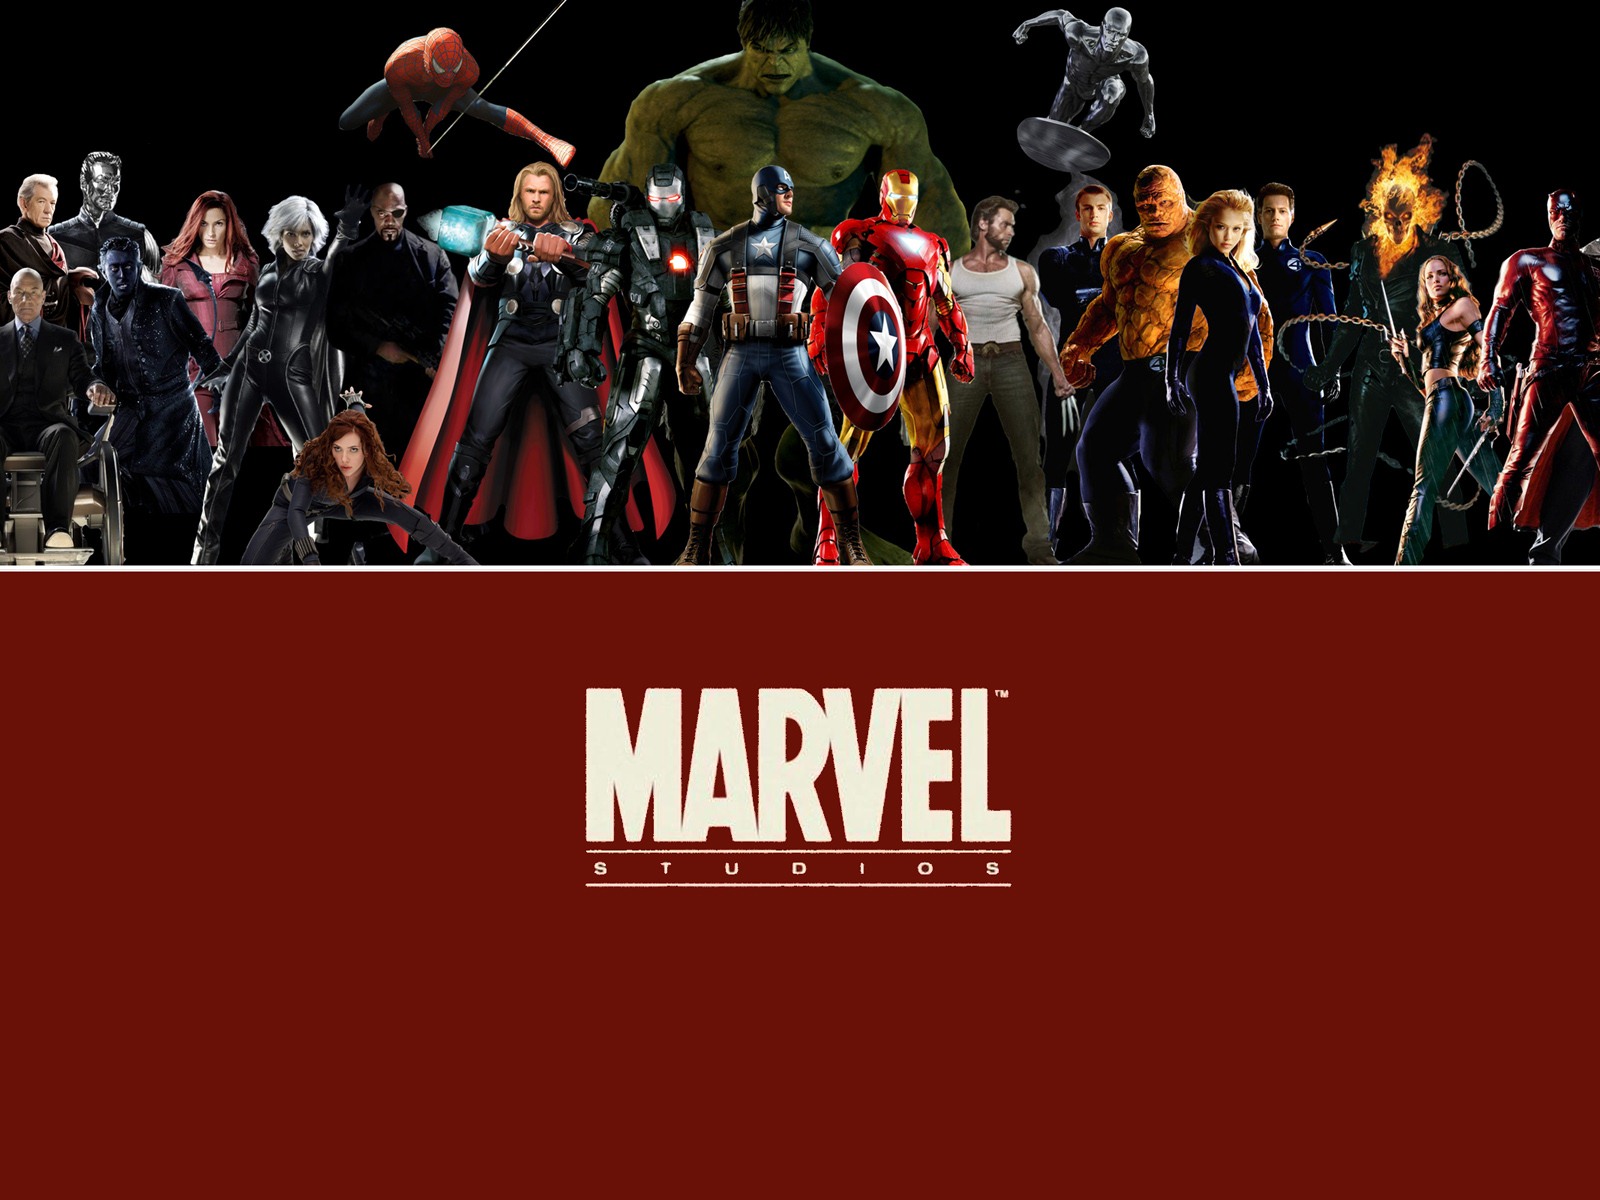 The Avengers 2012 HD wallpapers #8 - 1600x1200